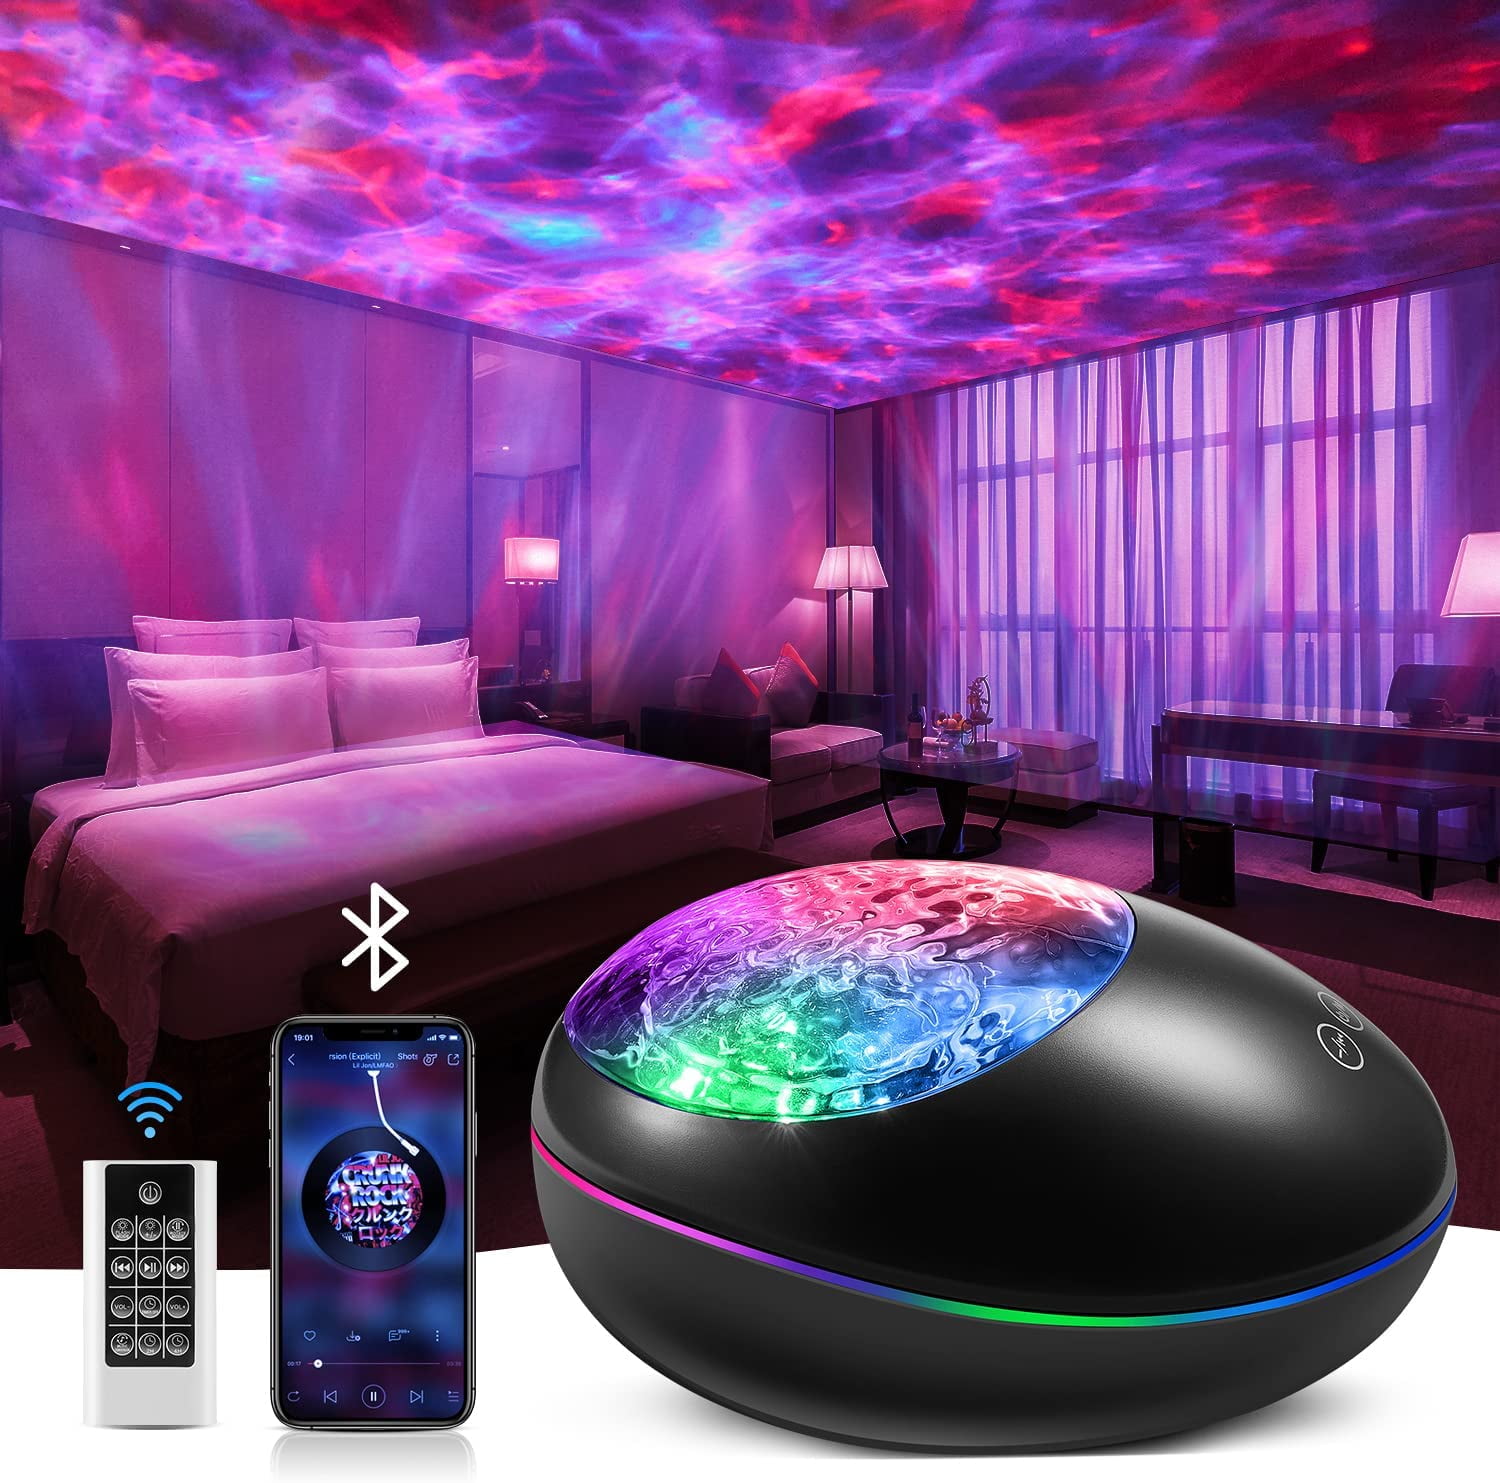 One Fire Galaxy Projector,Night Light Projector Star Projector Bedroom Ocean Wave Projector Kids White Noise Music Bluetooth Starlight,Star Projector